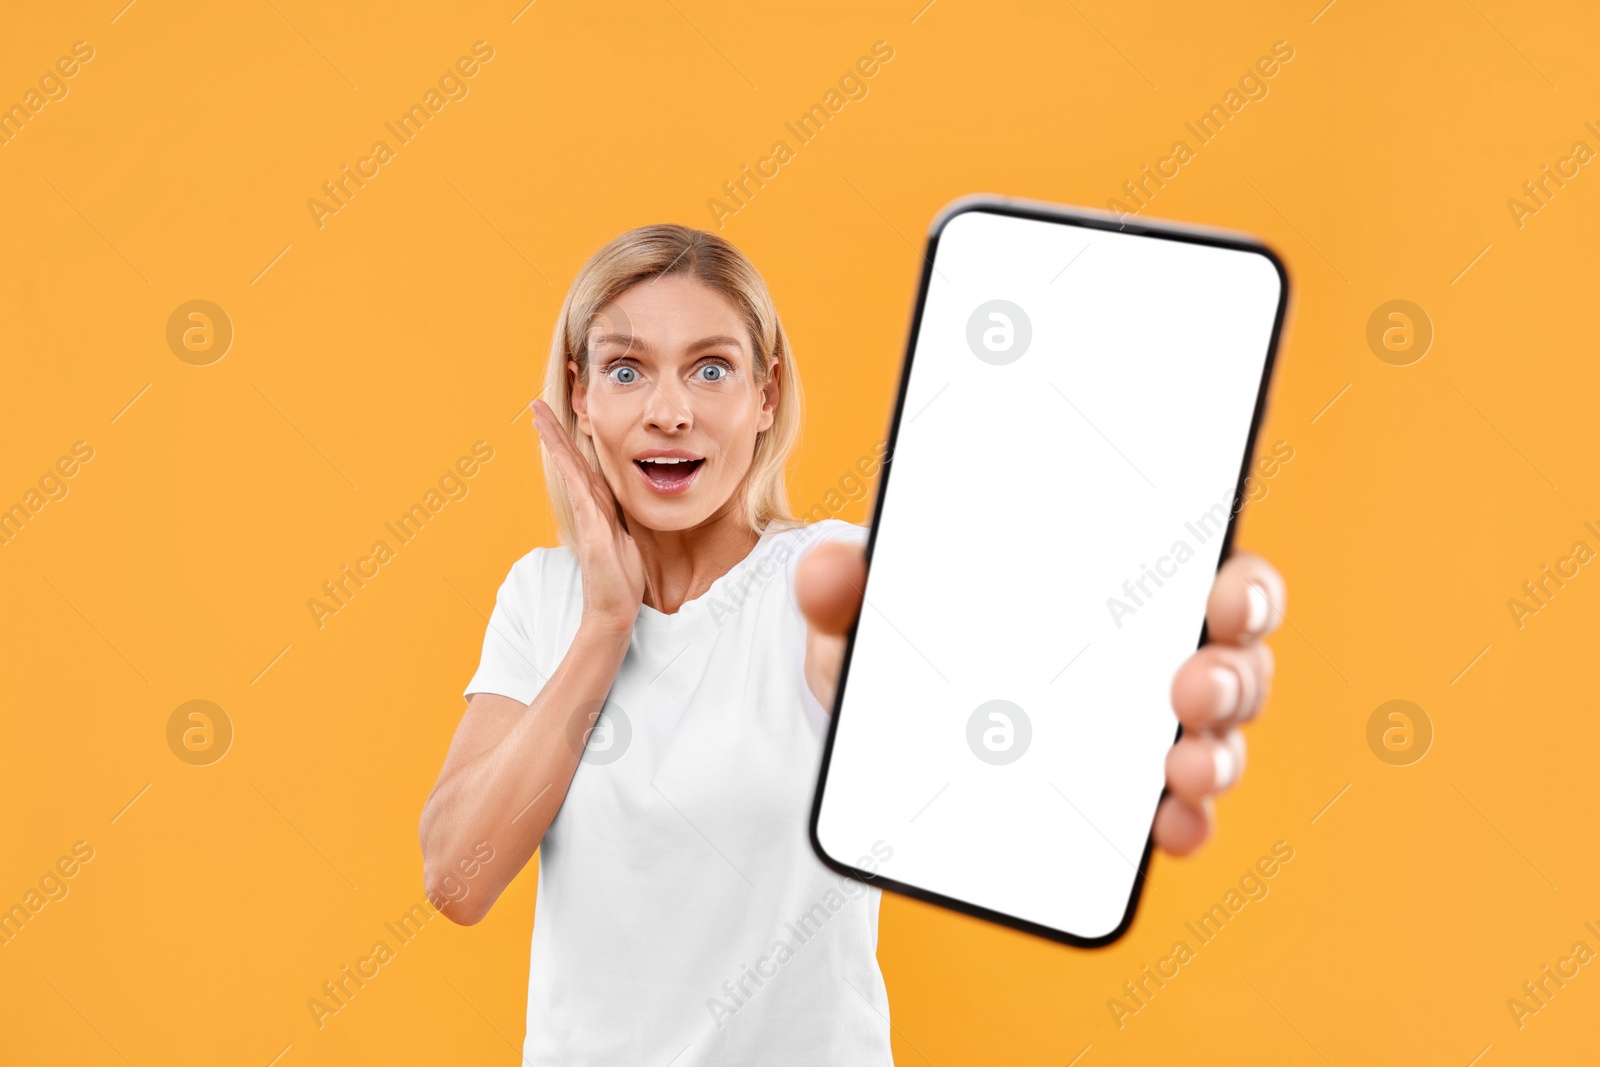 Photo of Surprised woman holding smartphone with blank screen on orange background